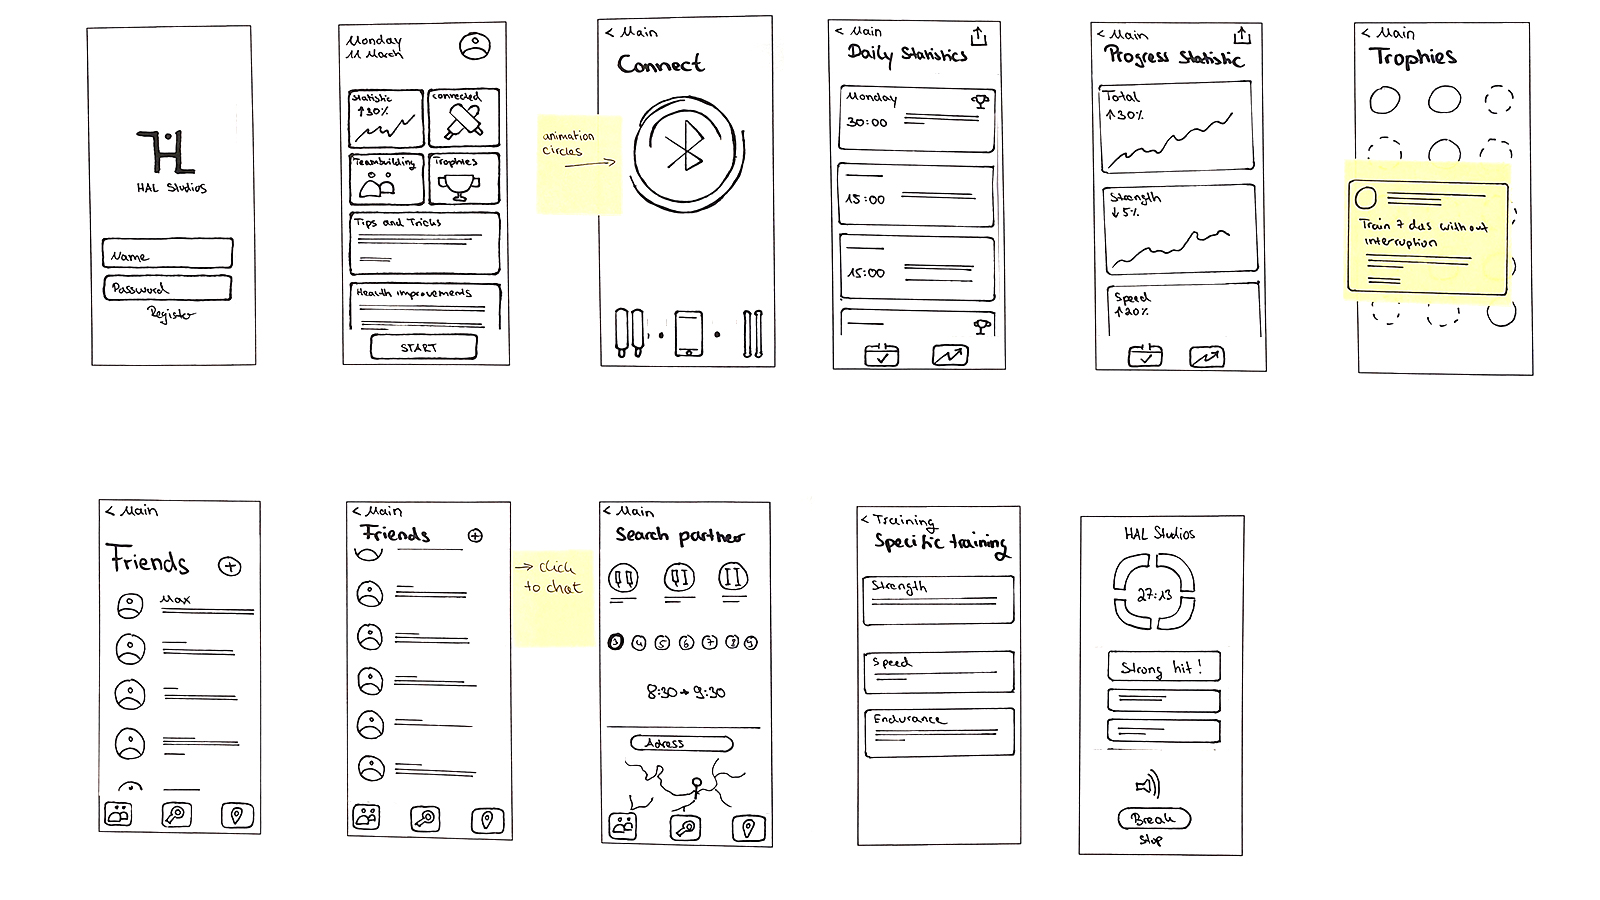 Paper prototye from the app development insights